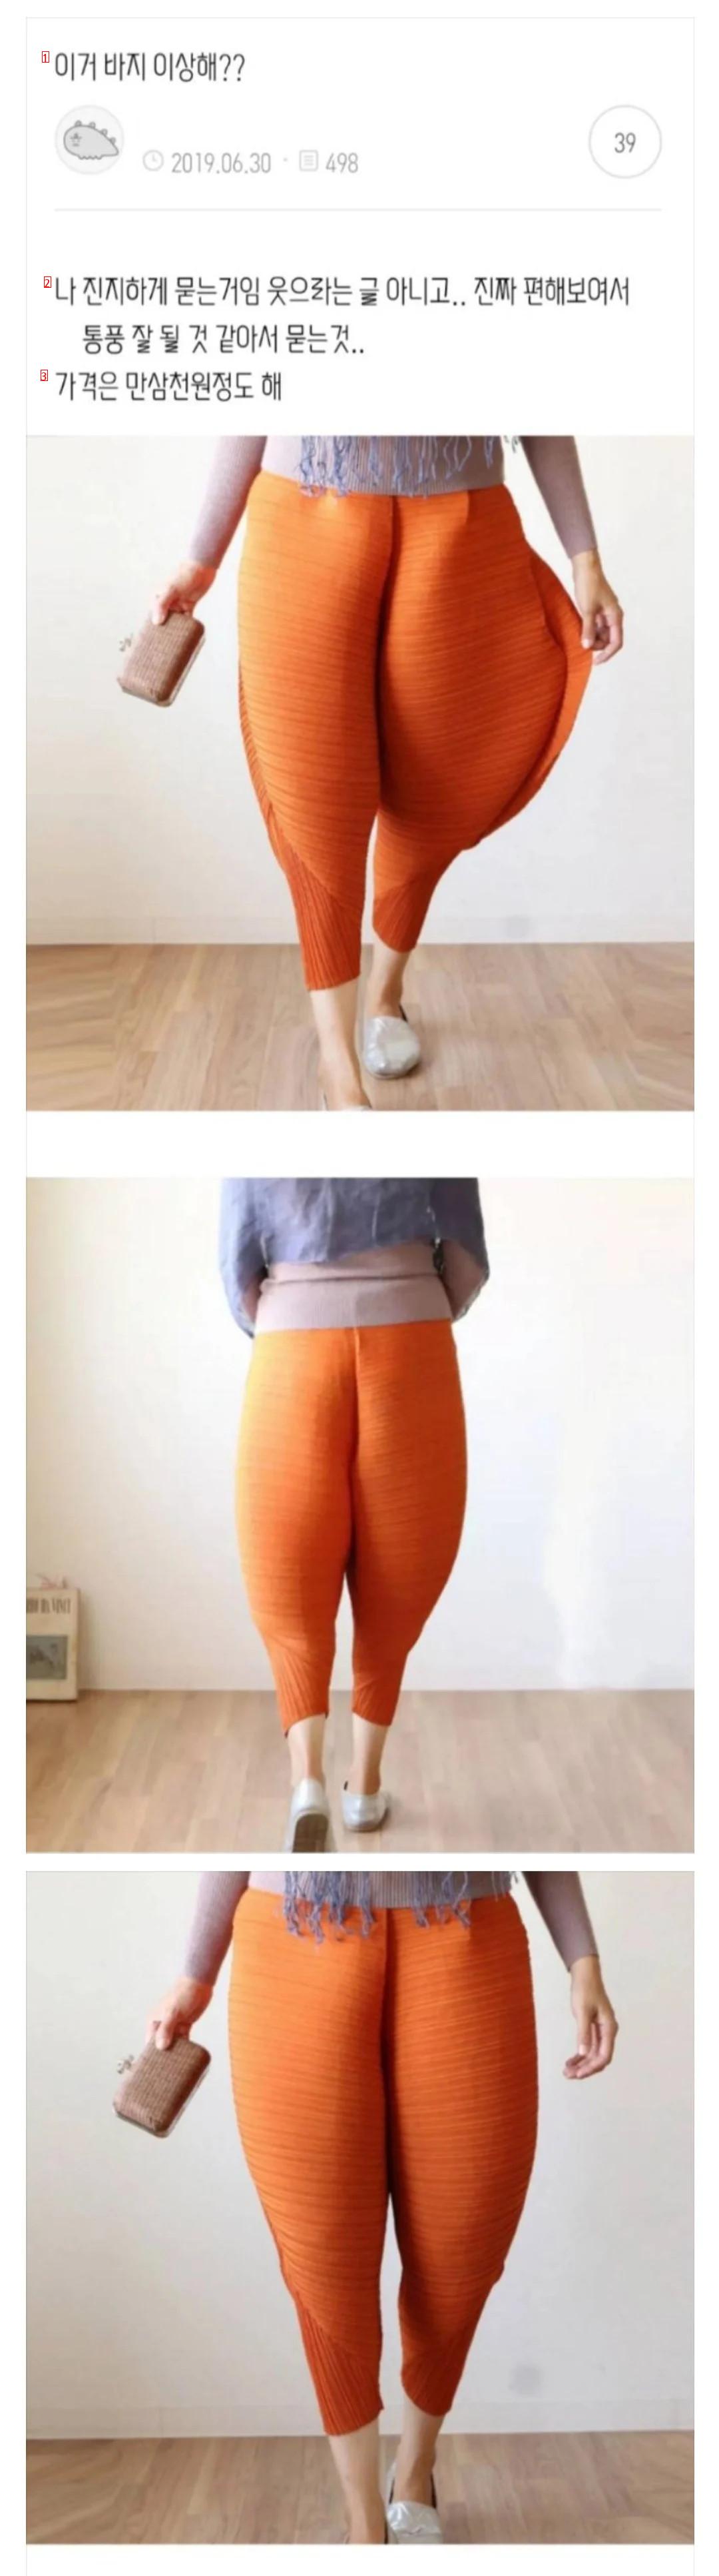 I'm asking seriously, but these pants are weird